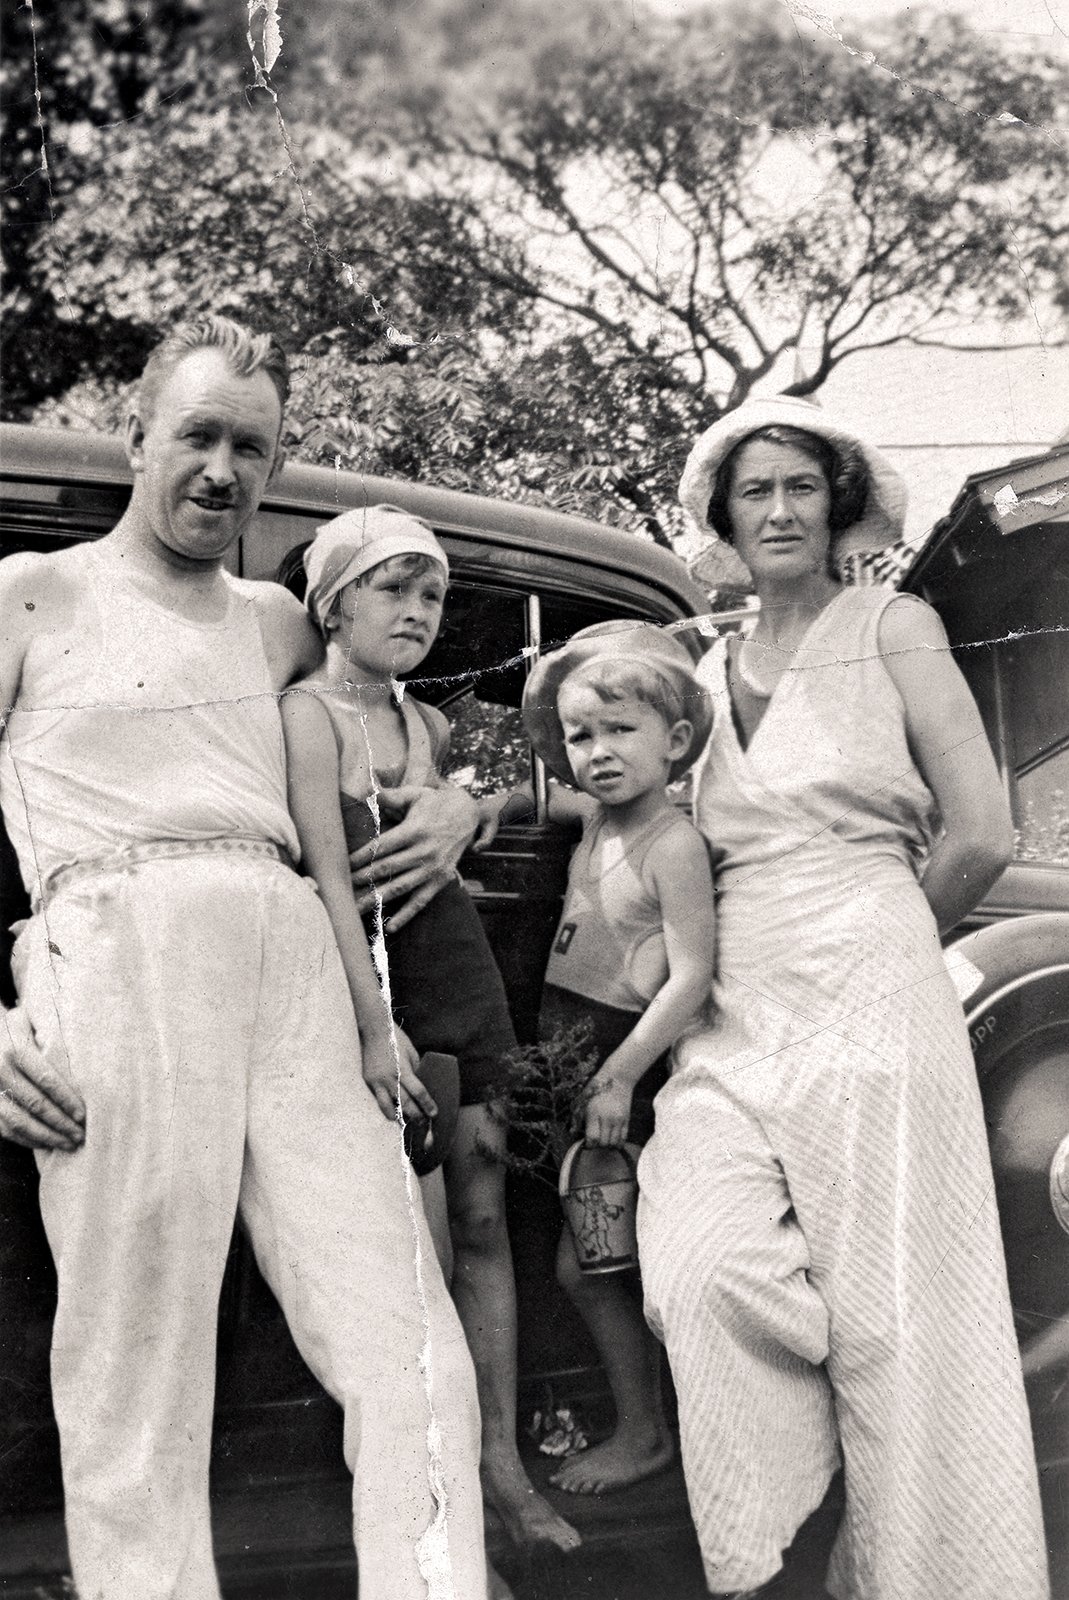 Michael Donnelly, Patricia Donnelly (Ryan), Frank Donnelly and Mary Moore, Keansburg Beach, New Jersey, 1936.